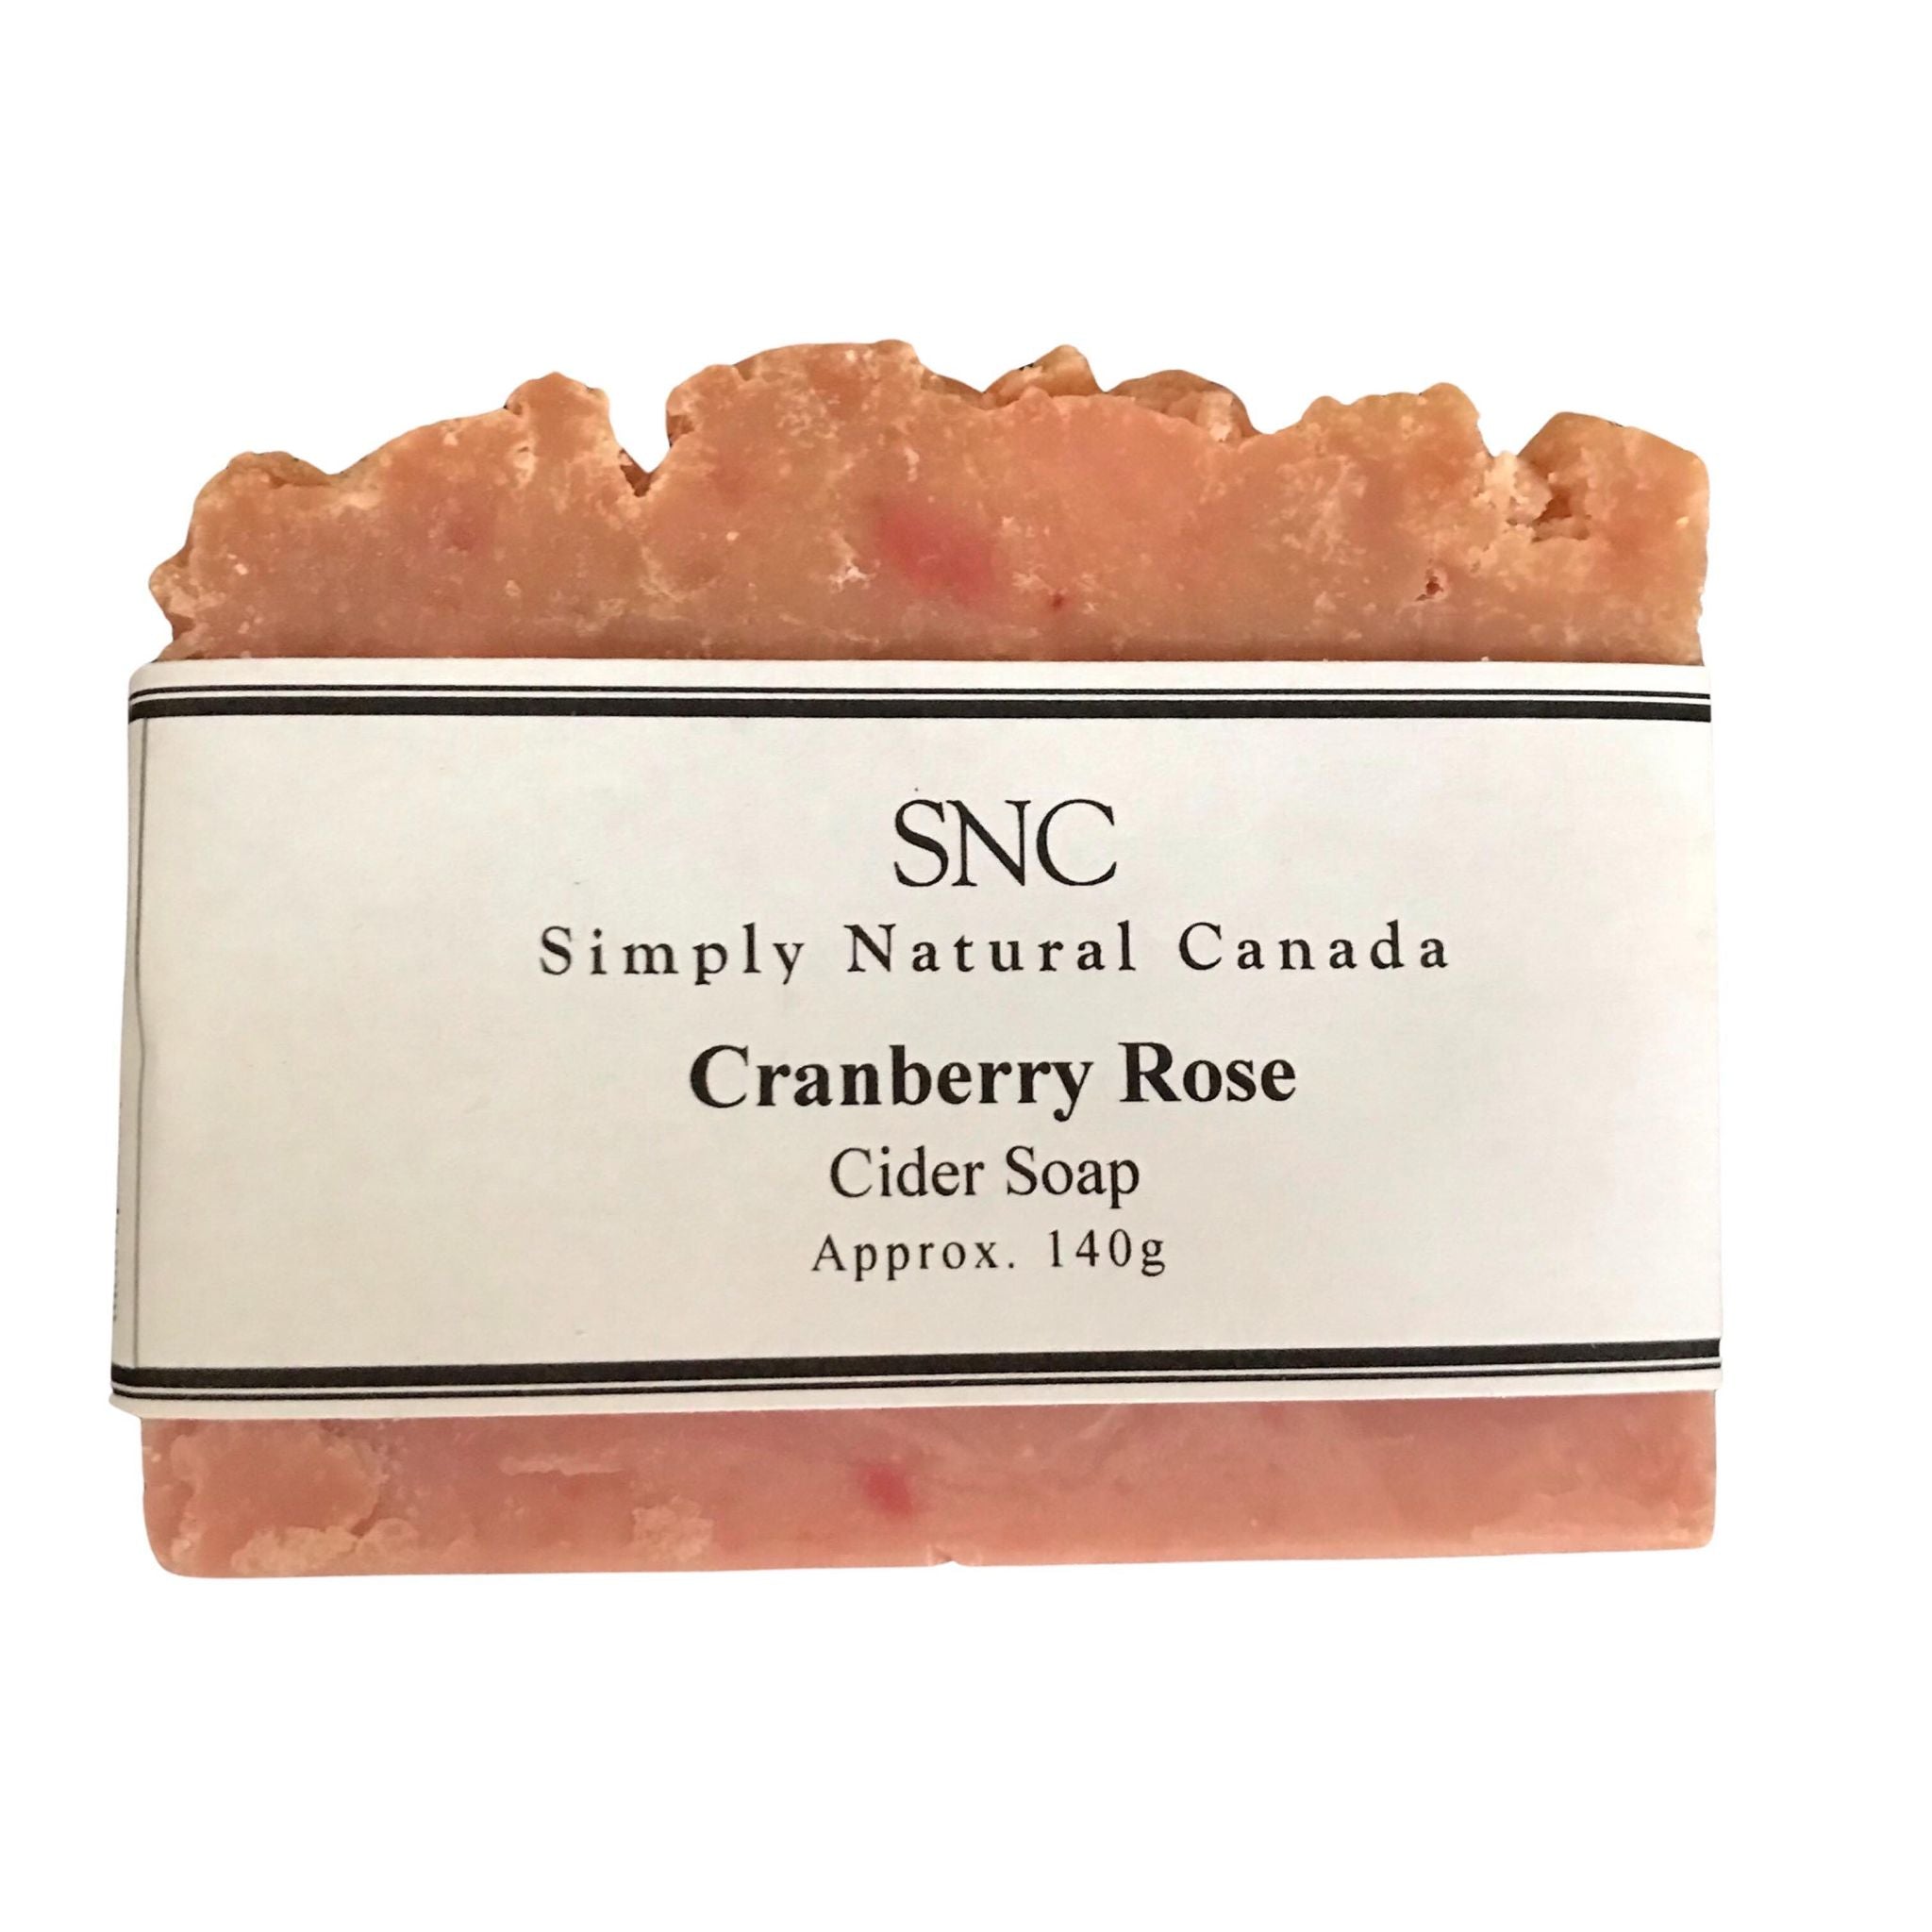 Simply Natural Canada cranberry rose rectangle vegan cider soap made in Canada with Ontario cranberry apple cider